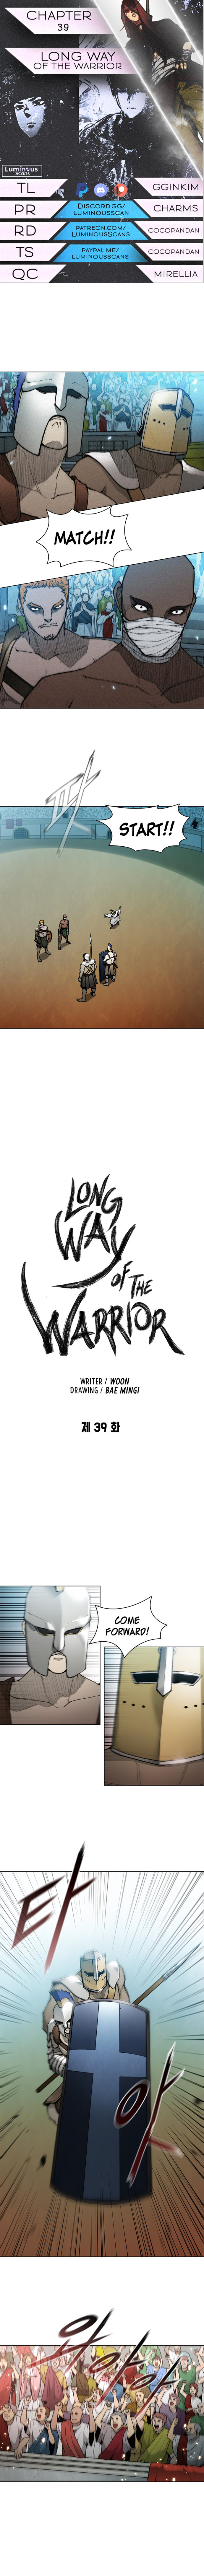 Long Way of the Warrior - Chapter 39 Page 1